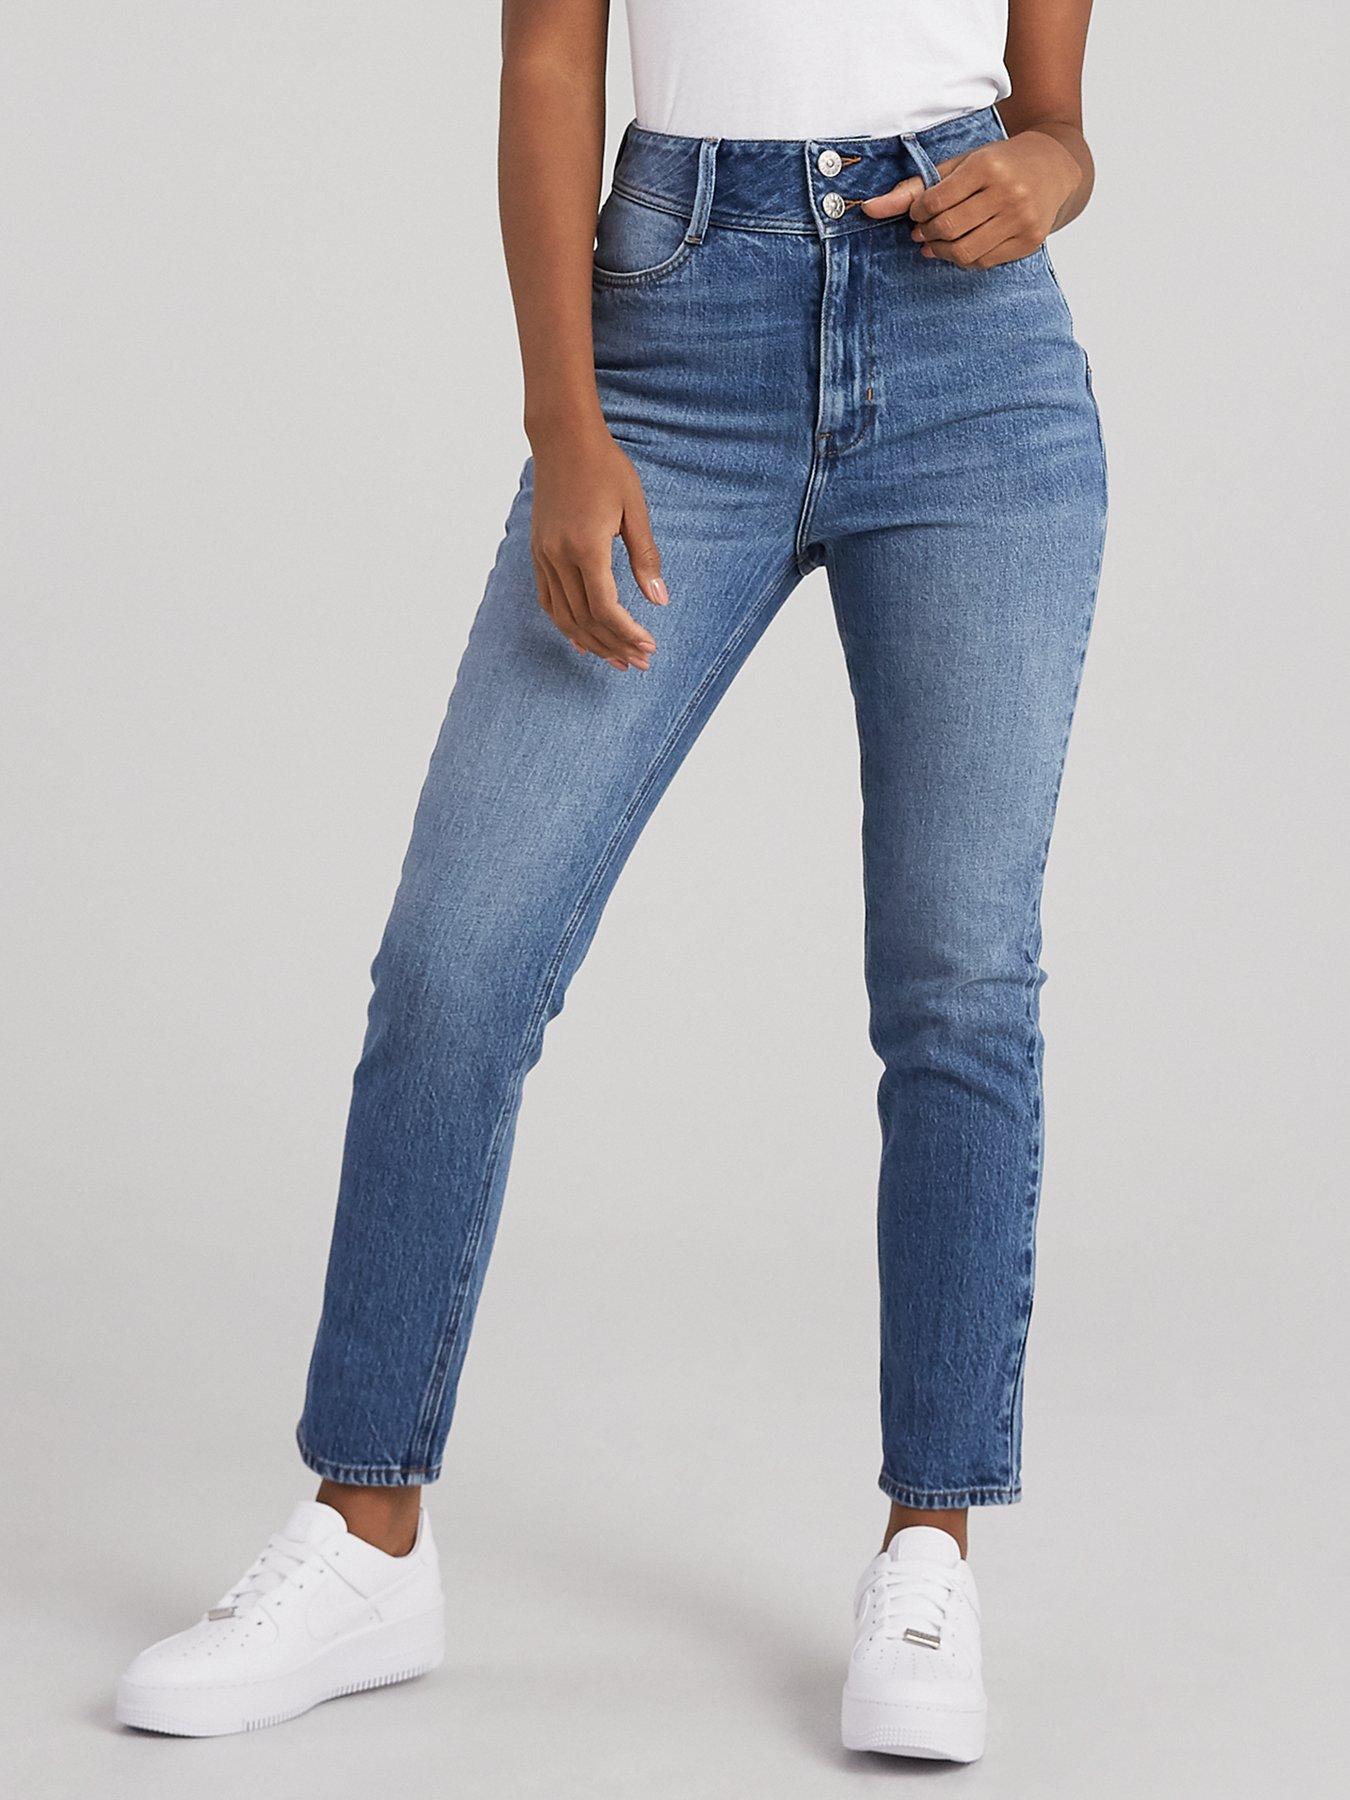 ripped mom jeans uk